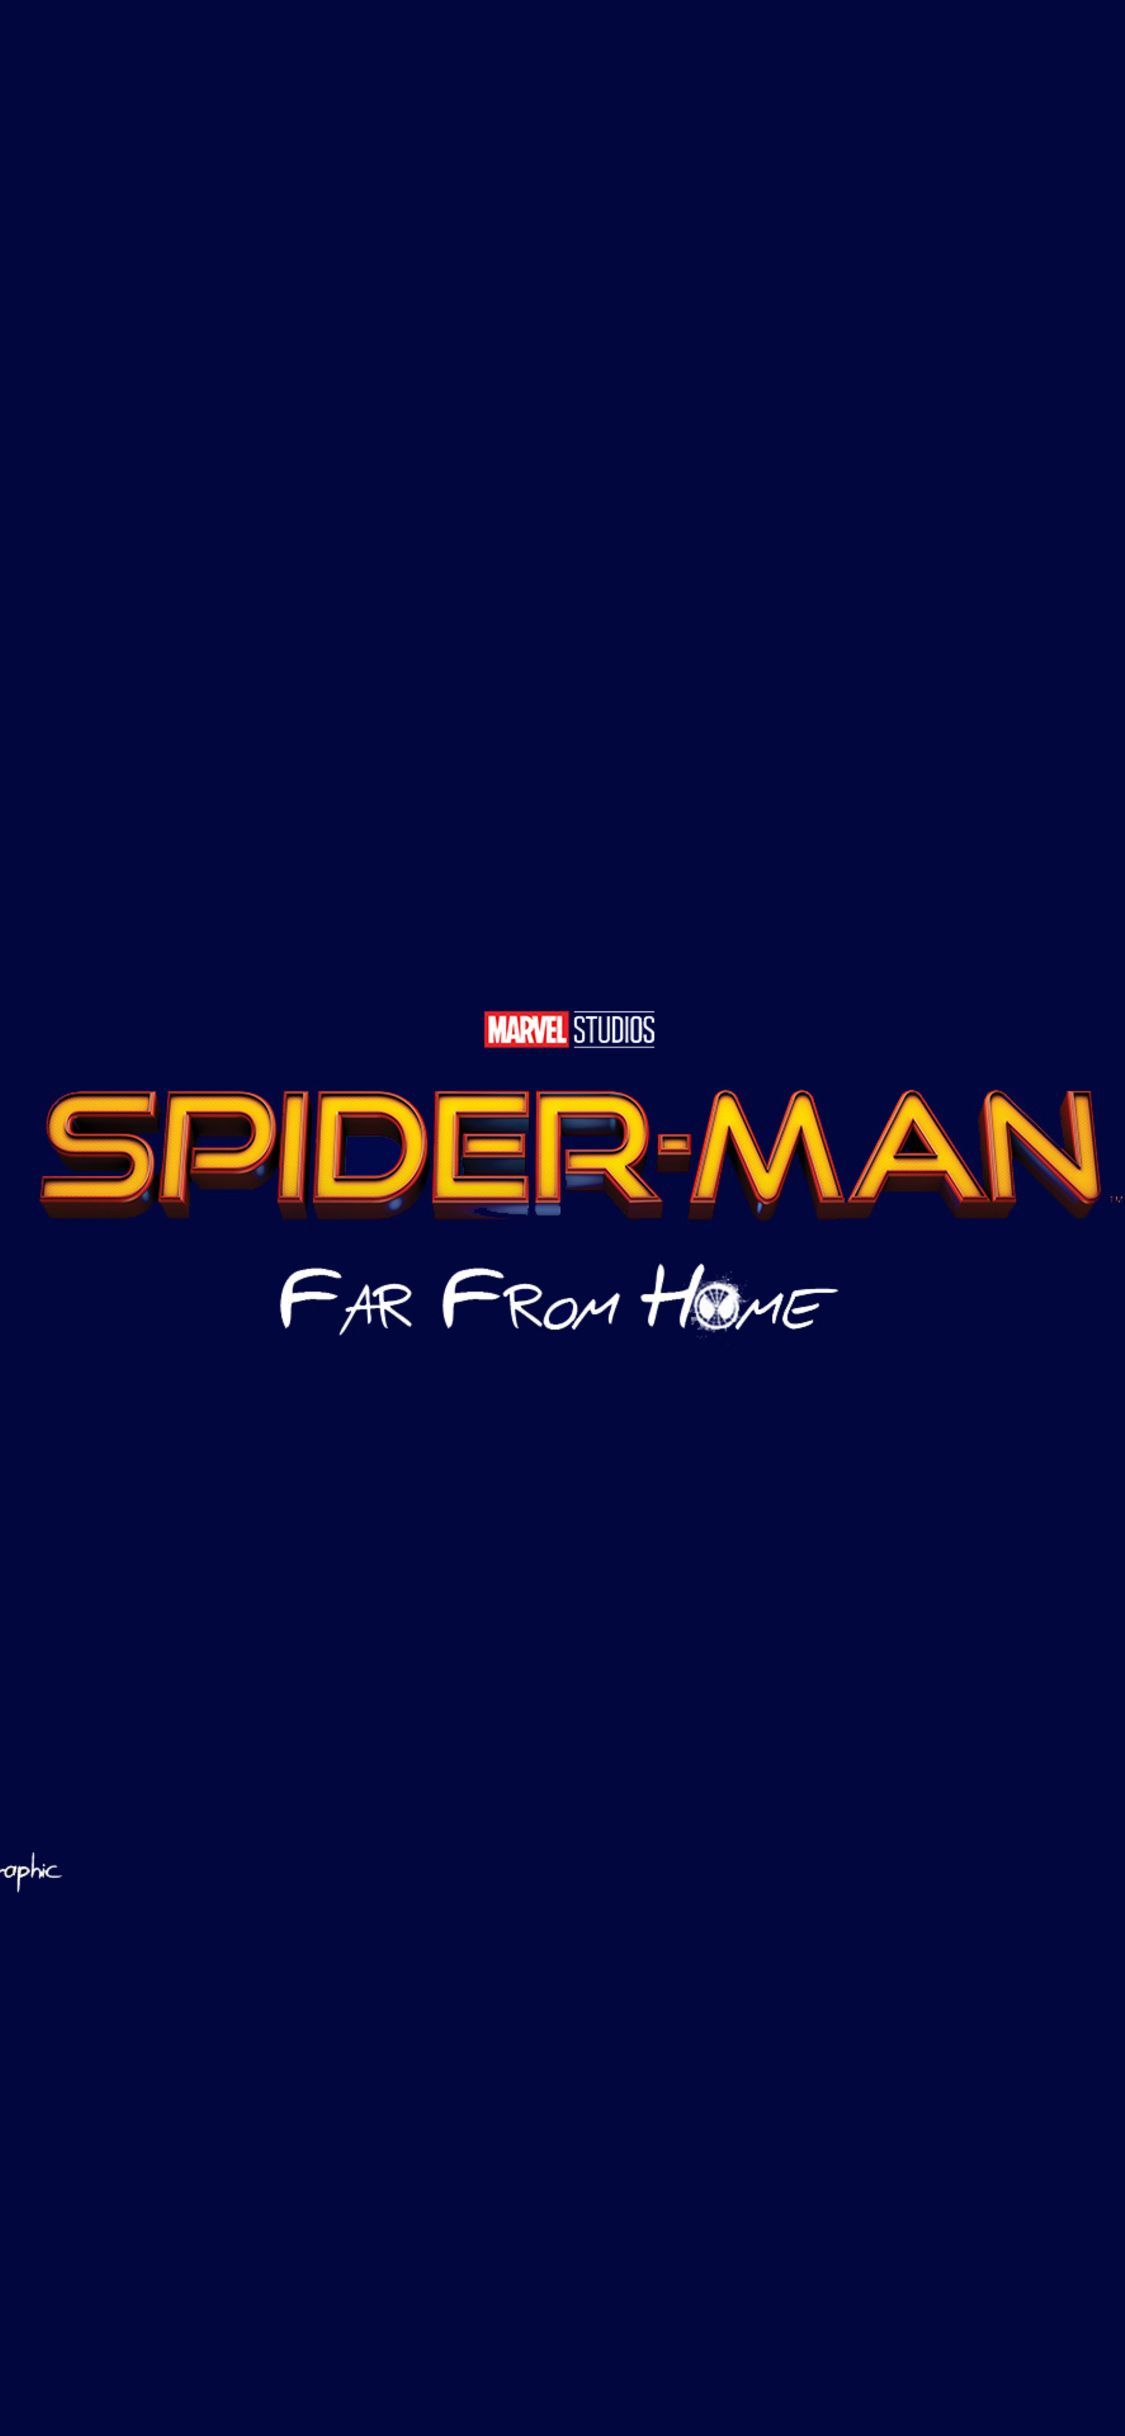 Spiderman Far From Home Movie Logo iPhone XS, iPhone iPhone X HD 4k Wallpaper, Image, Background, Photo a. Spiderman, Home movies, Spiderman movie